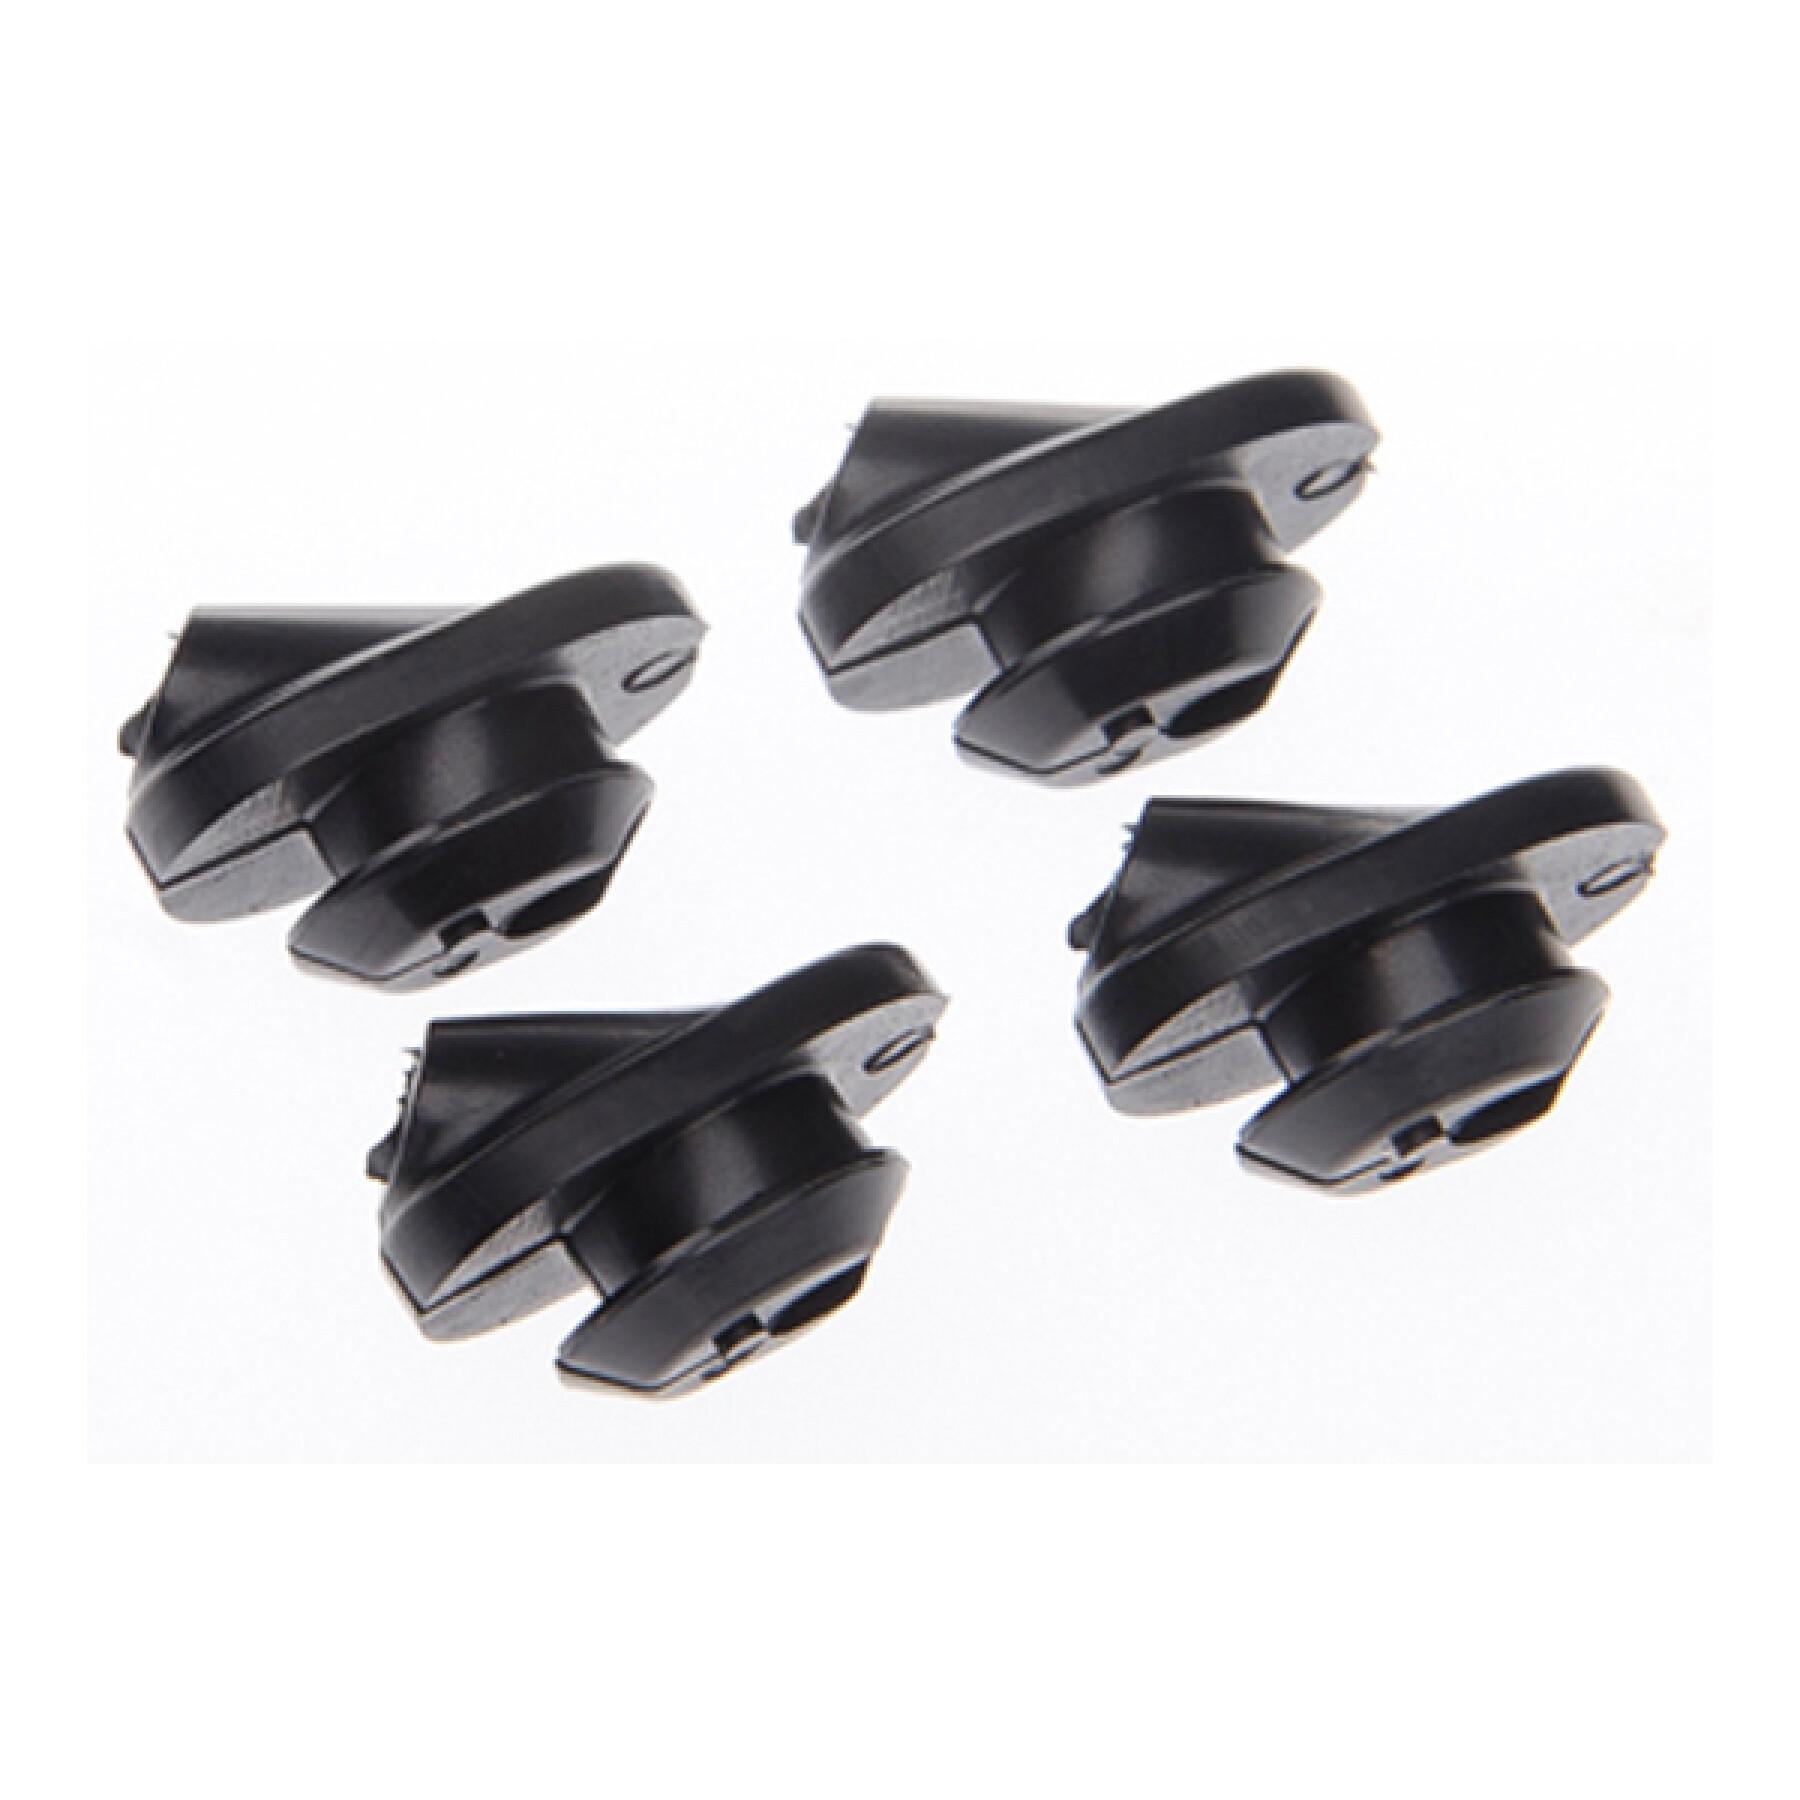 Set of 4 cable guides Shimano smgm01 ultegra Di2 ew-sd50 6mm